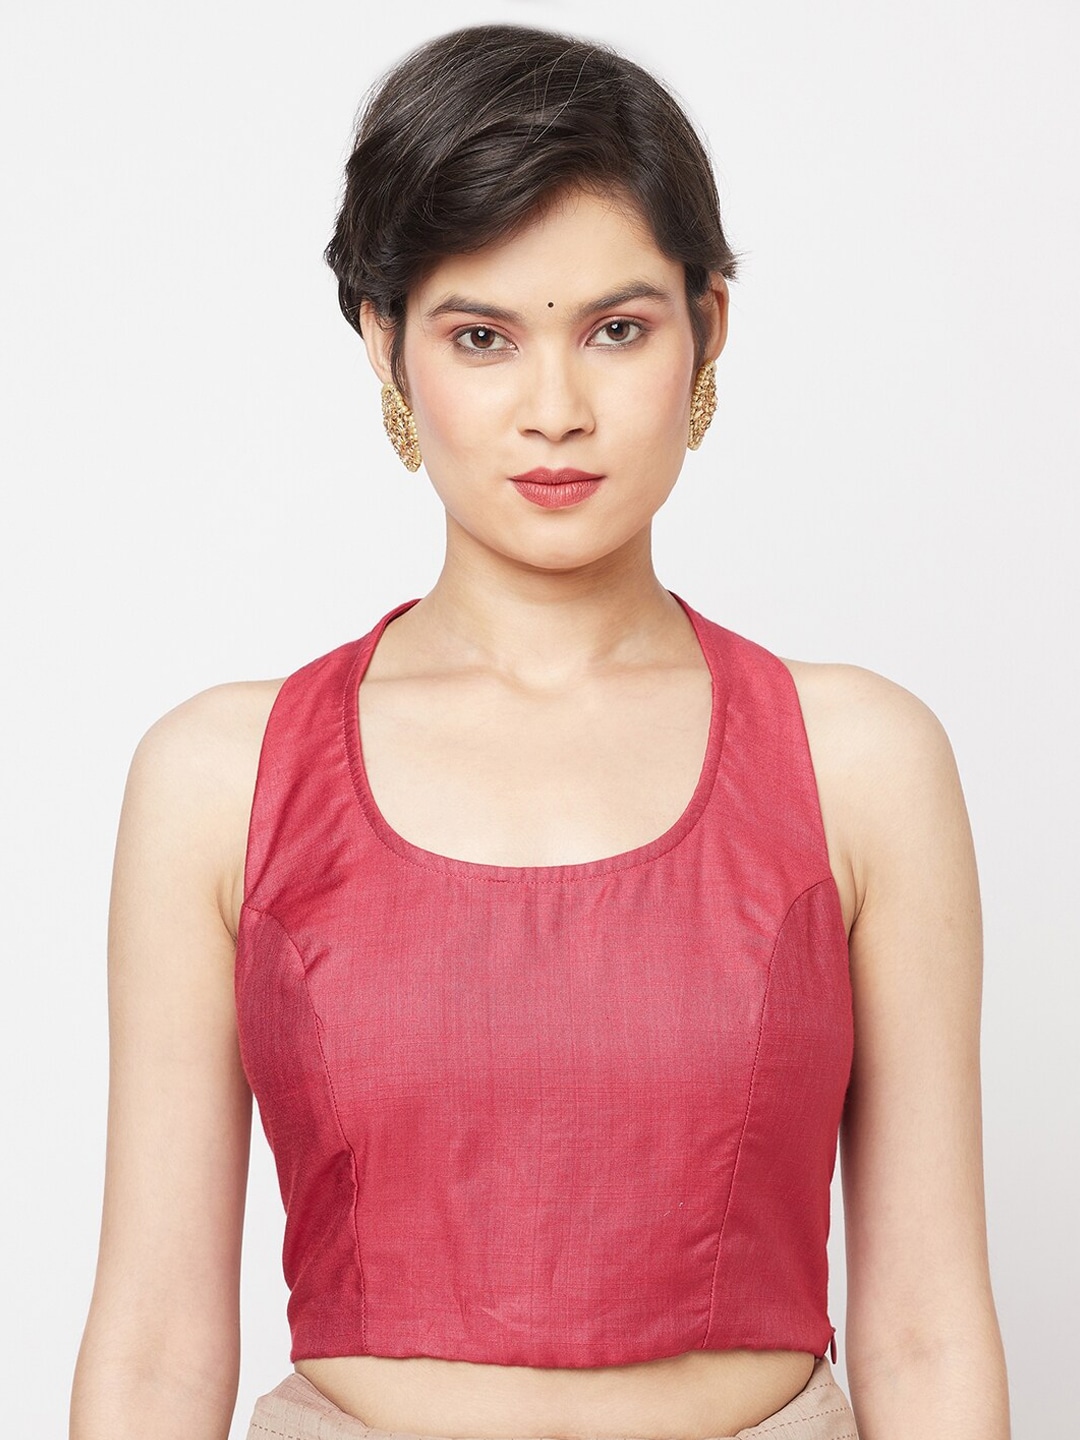 Fabindia Women Pink Solid Woven Saree Blouse Price in India